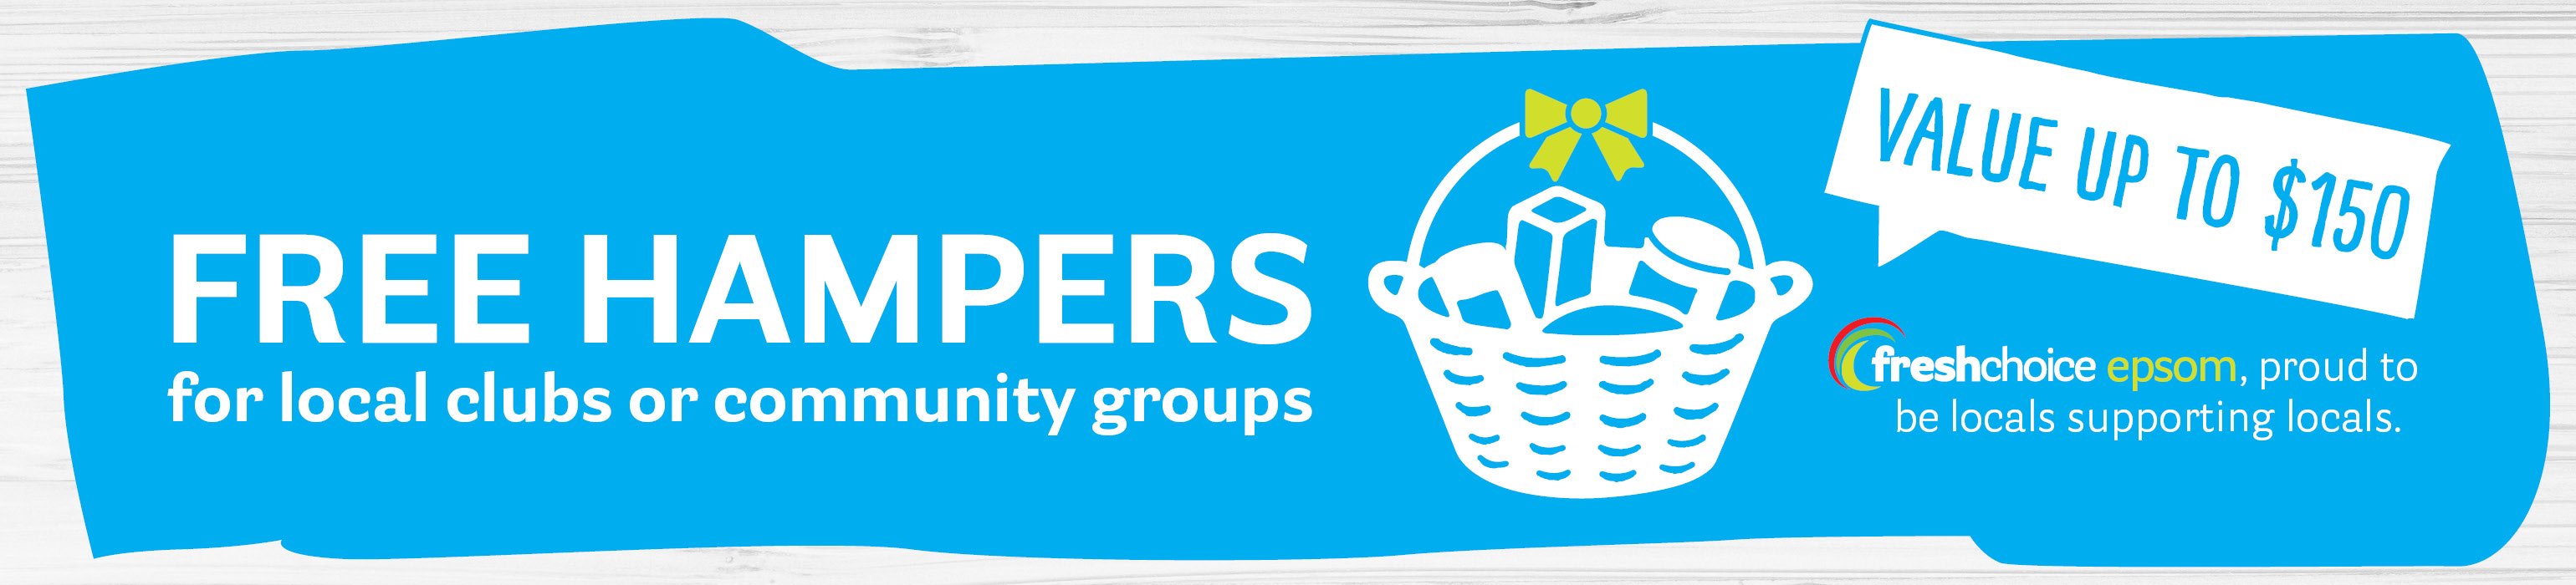 Free hampers for local clubs or community groups. 